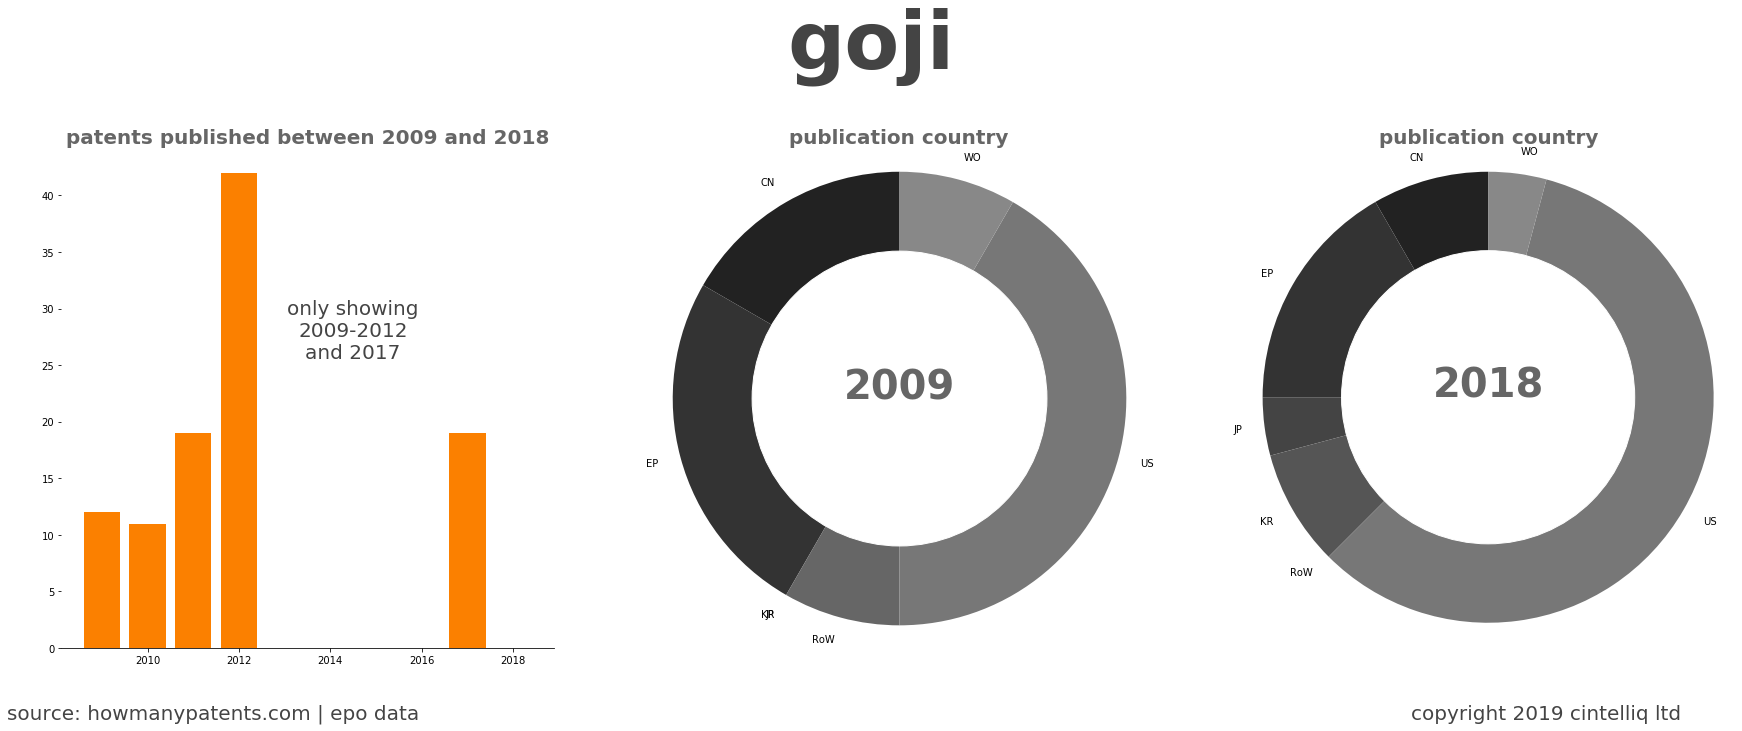 summary of patents for Goji